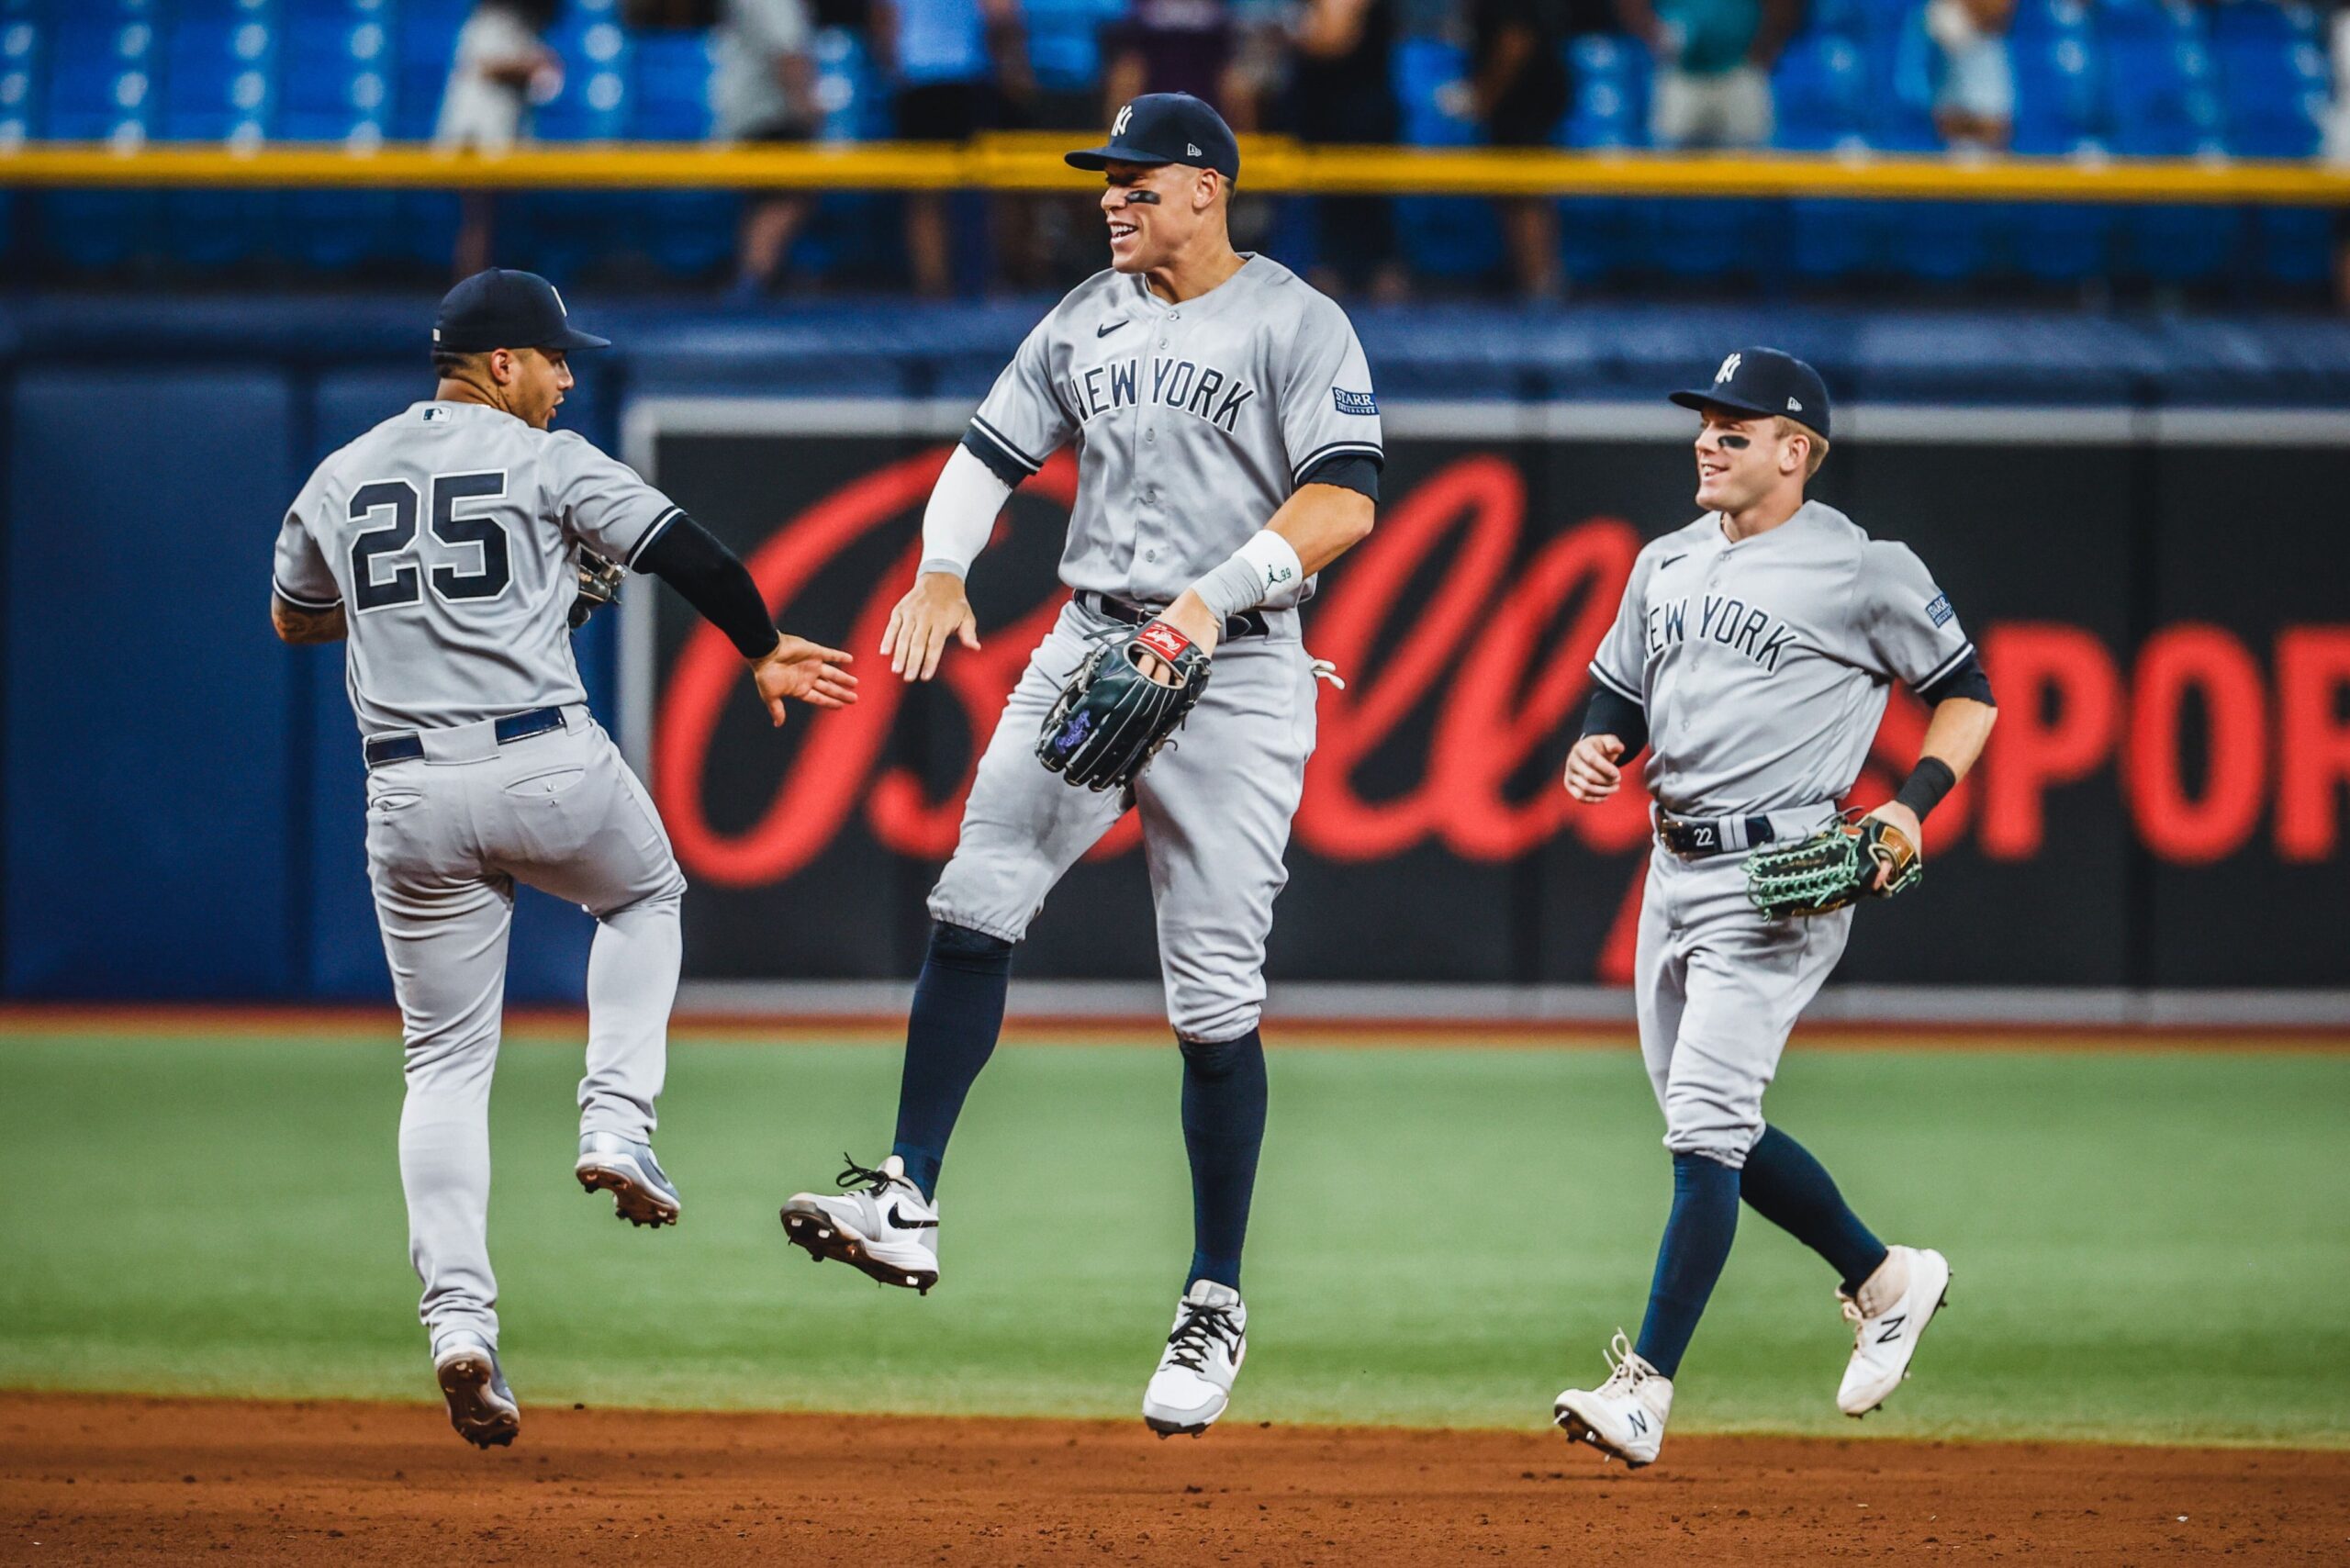 Yankees split with Rays: What it means for 2023 AL East hopes